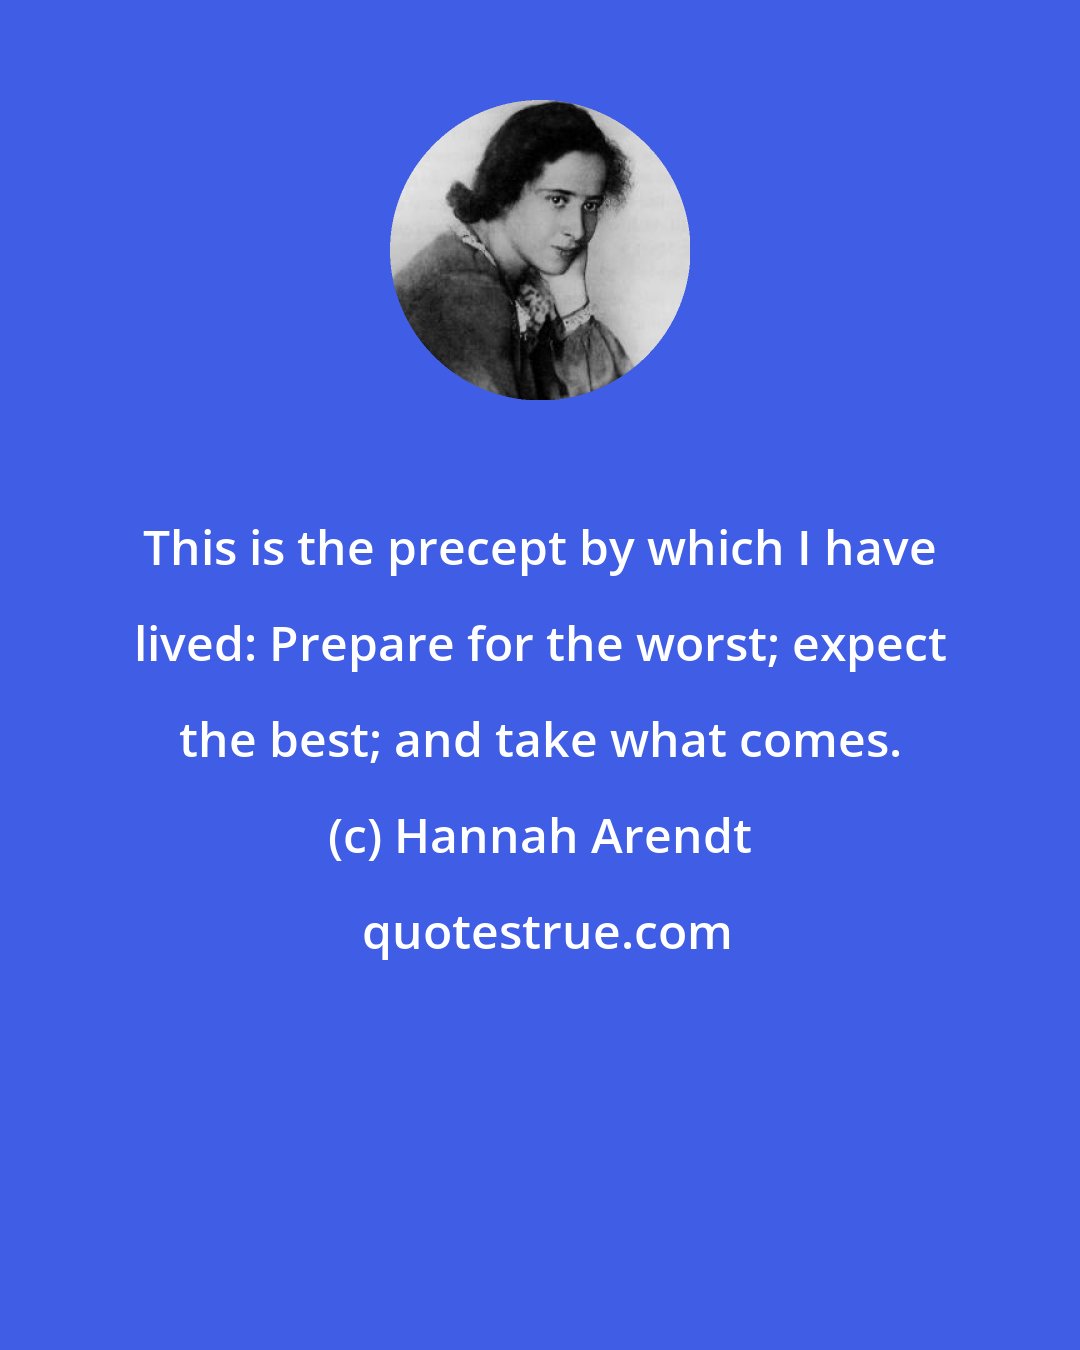 Hannah Arendt: This is the precept by which I have lived: Prepare for the worst; expect the best; and take what comes.